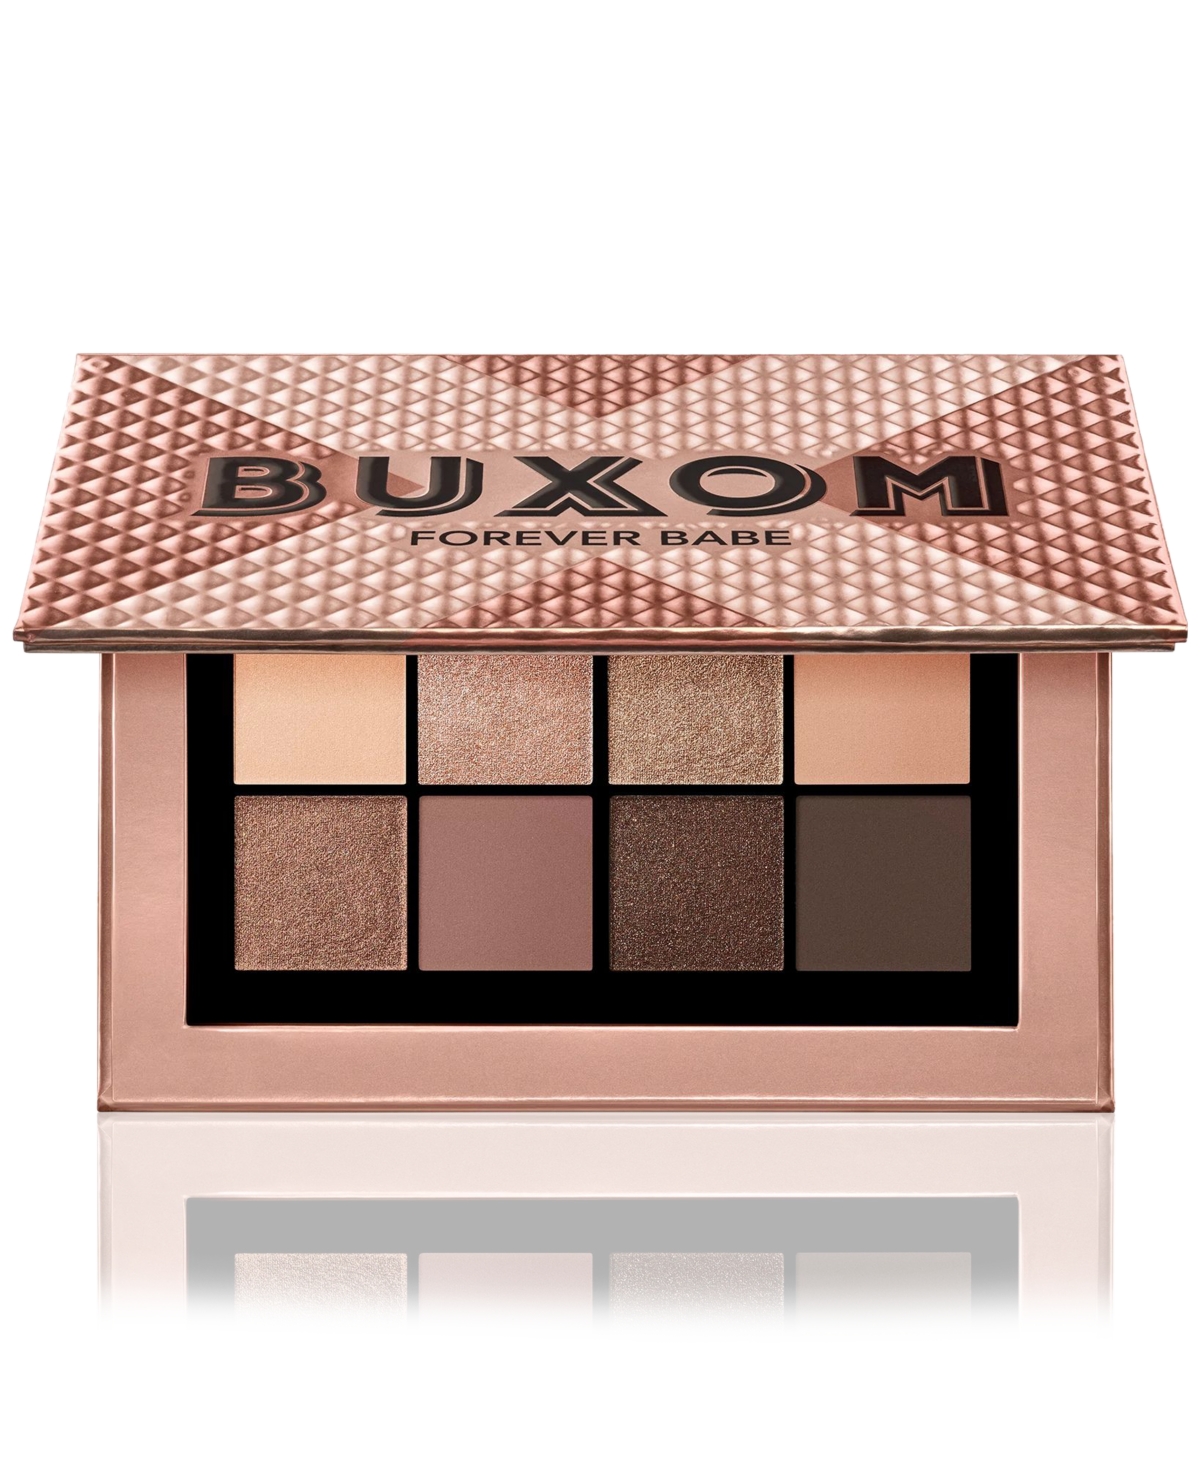 Forever Babe Iconic Nudes Eyeshadow Palette - Assorted